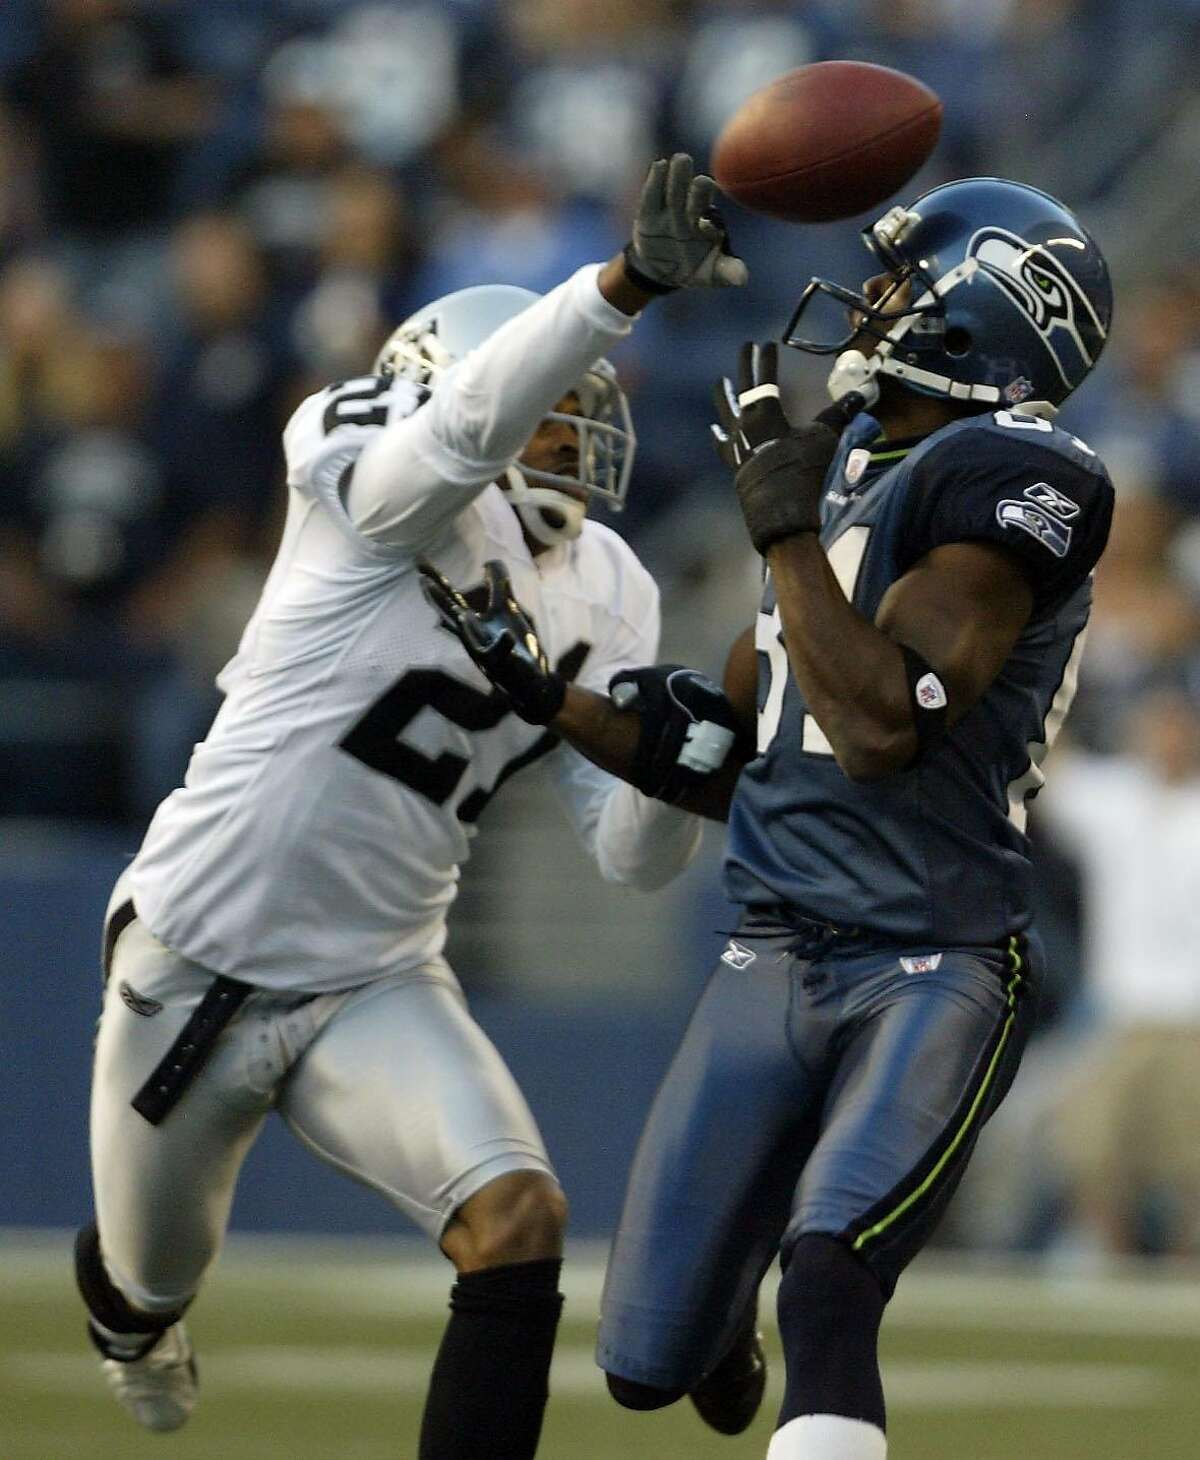 hawks01 Seattle Seahawks Nate Burleson has the ball knocked away by Oakland Raiders Nnamdi Asomugha during first quarter action of exhibition play at Qwest Field in Seattle, Wash., Thursday, August 31, 2006. Photo By Mike Urban Seattle Post-Intelligencer